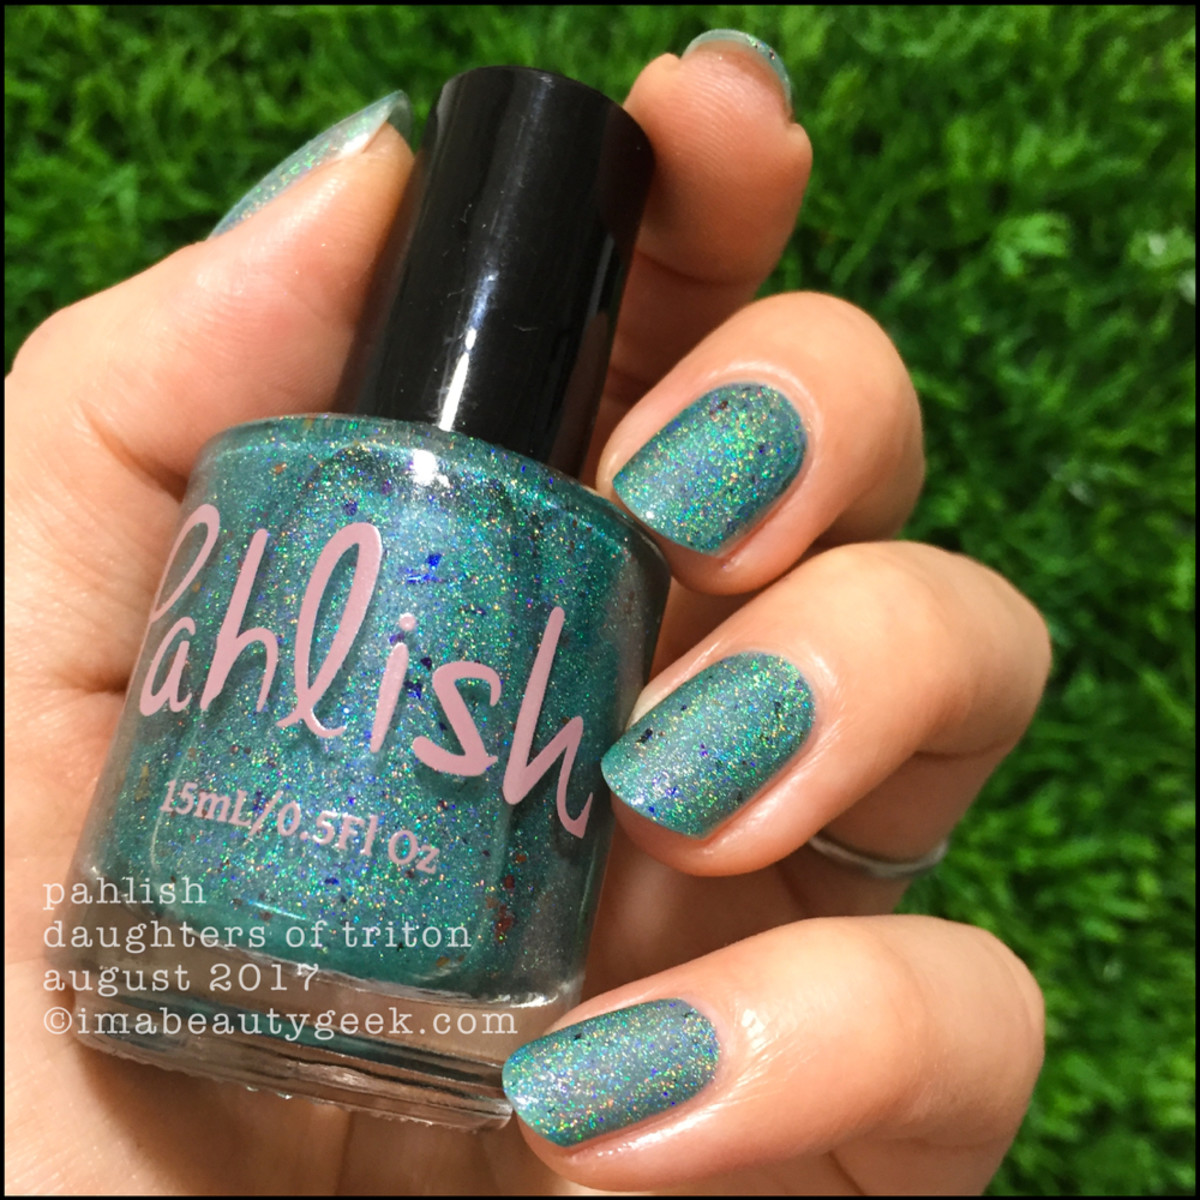 Pahlish Daughters of Triton _ Pahlish August 2017 Swatches Review